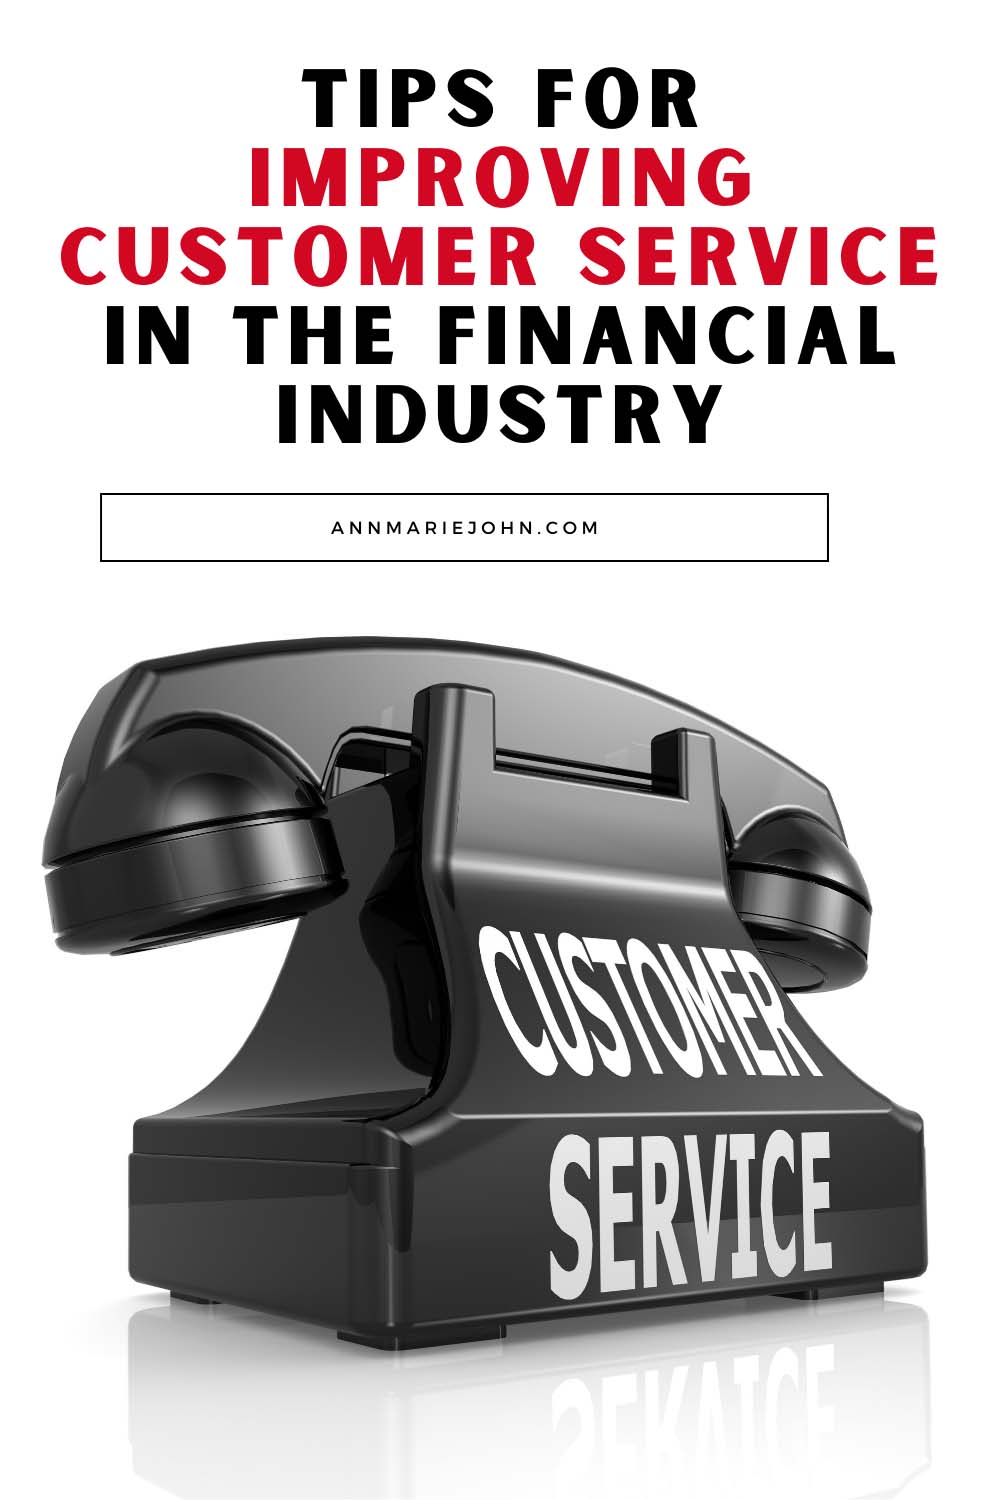 Improving Customer Service In The Financial Industry